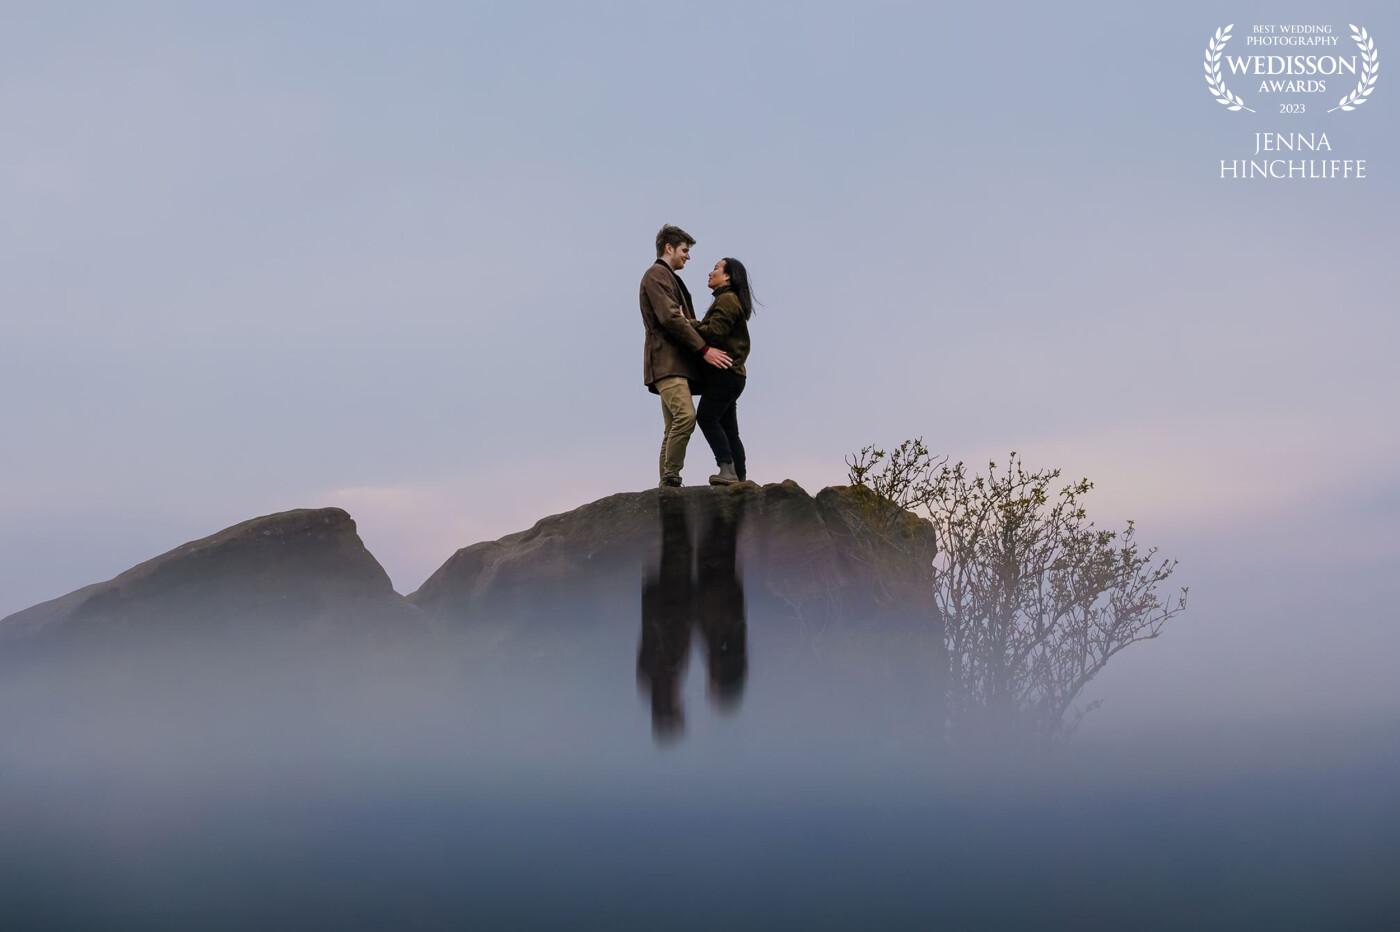 We didn't quite get the sunset we were hoping for on this shoot, but I still wanted to make the most of the sky, reflecting it so they're almost floating on their own little rock in space!